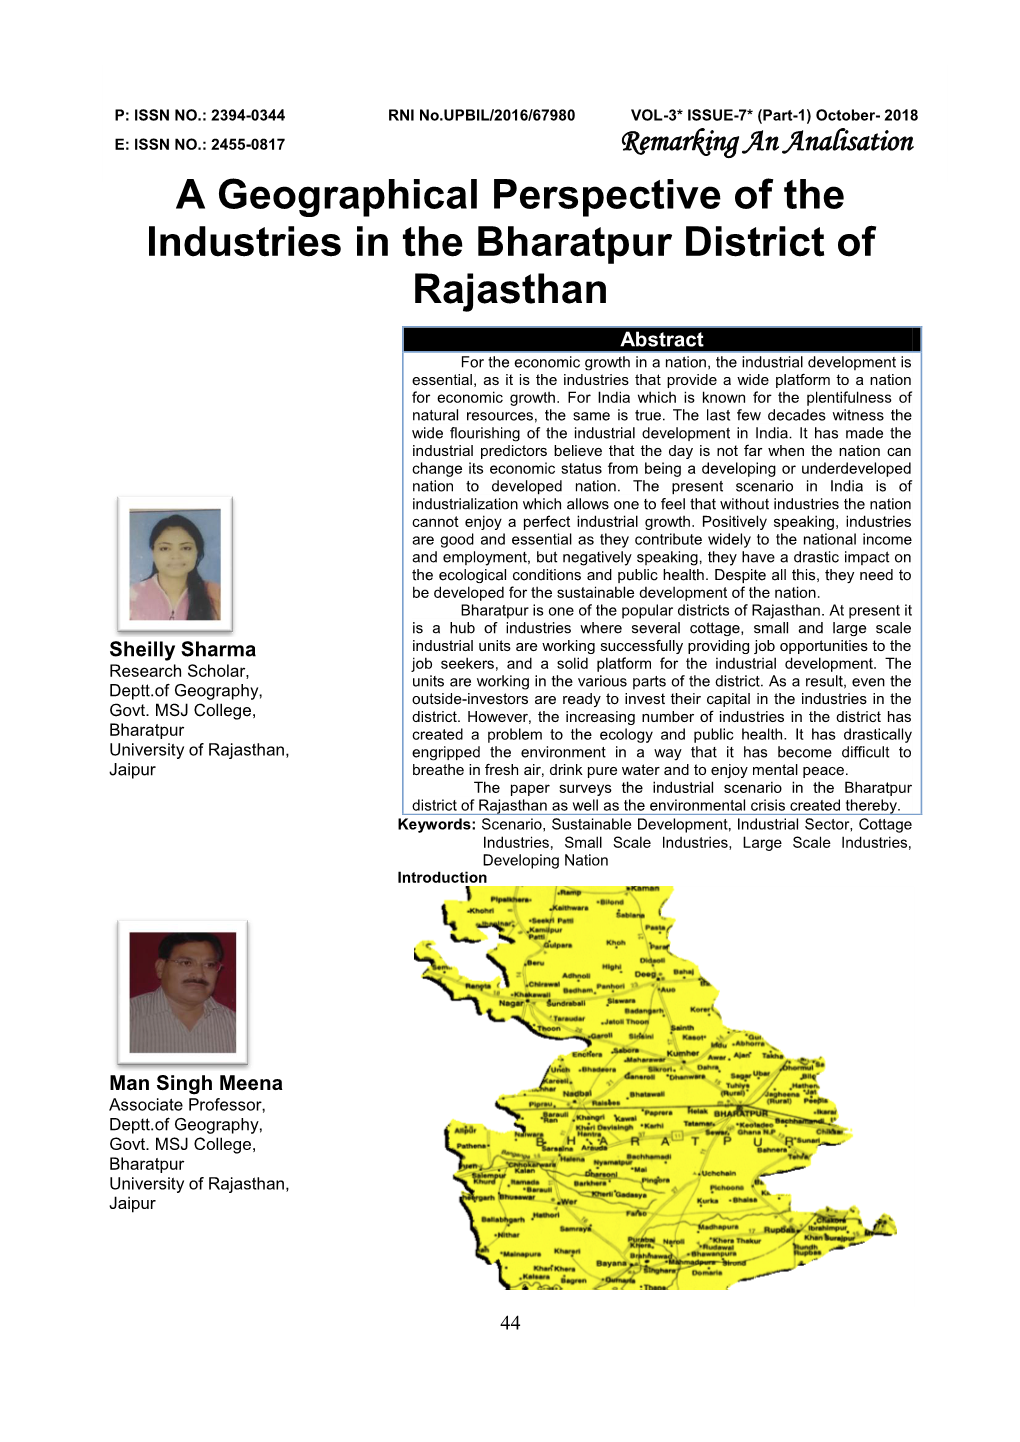 A Geographical Perspective of the Industries in the Bharatpur District